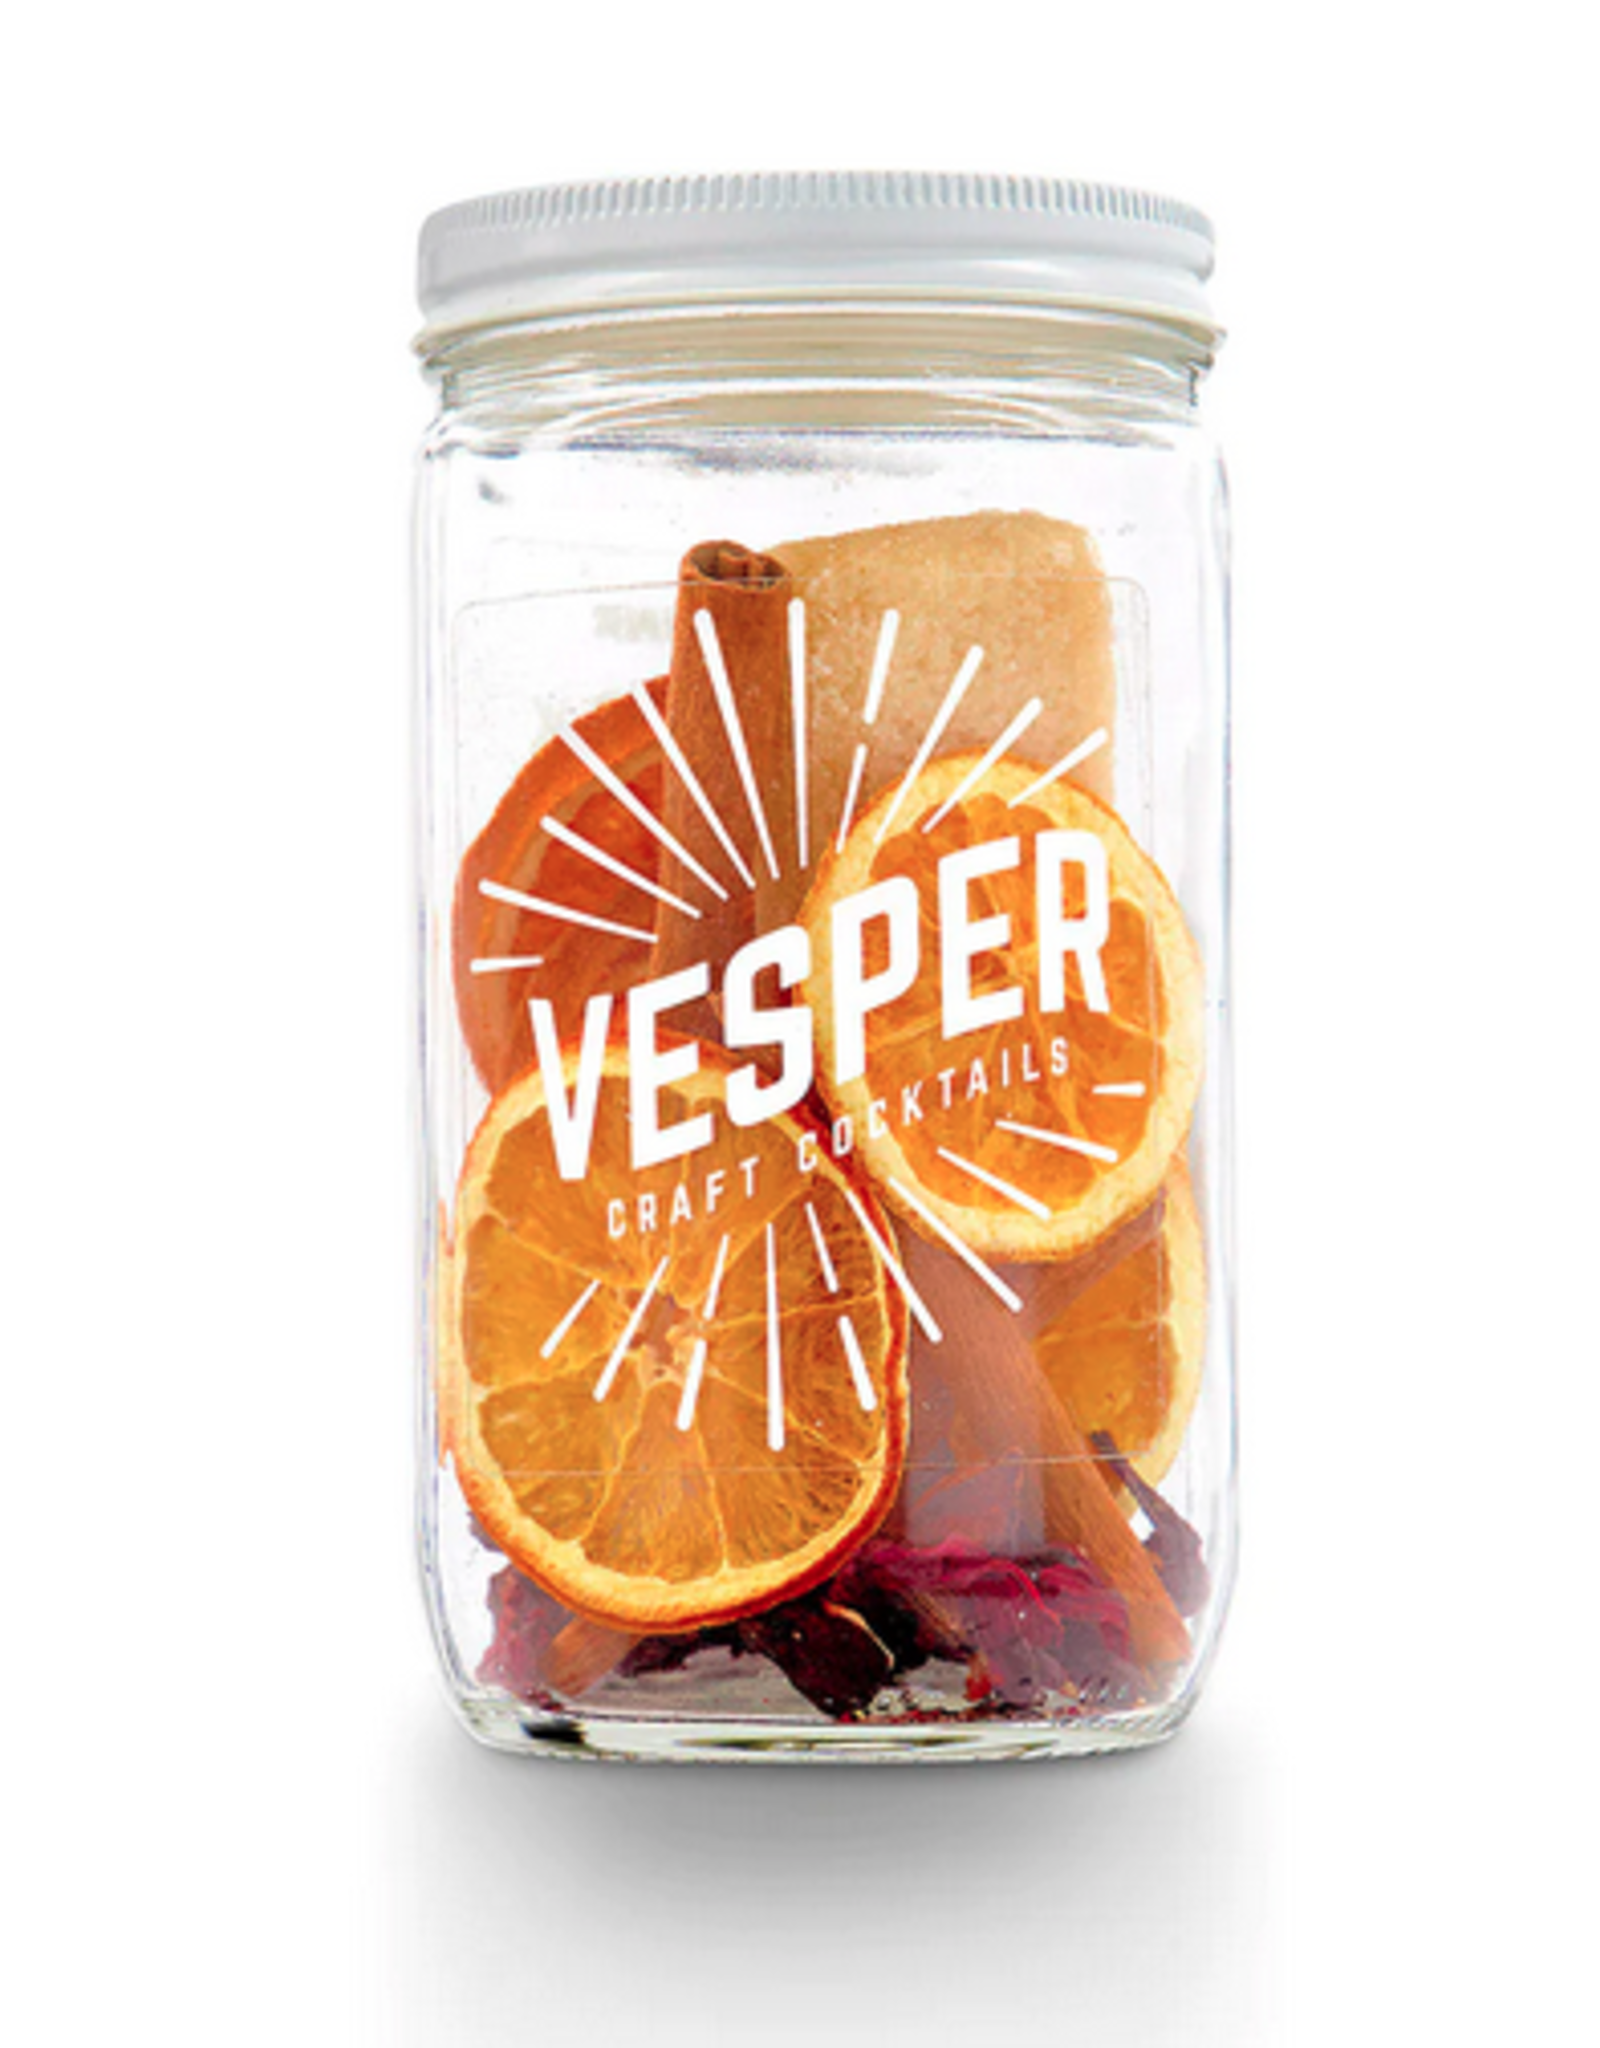 Mulled Wine Infusion Jar